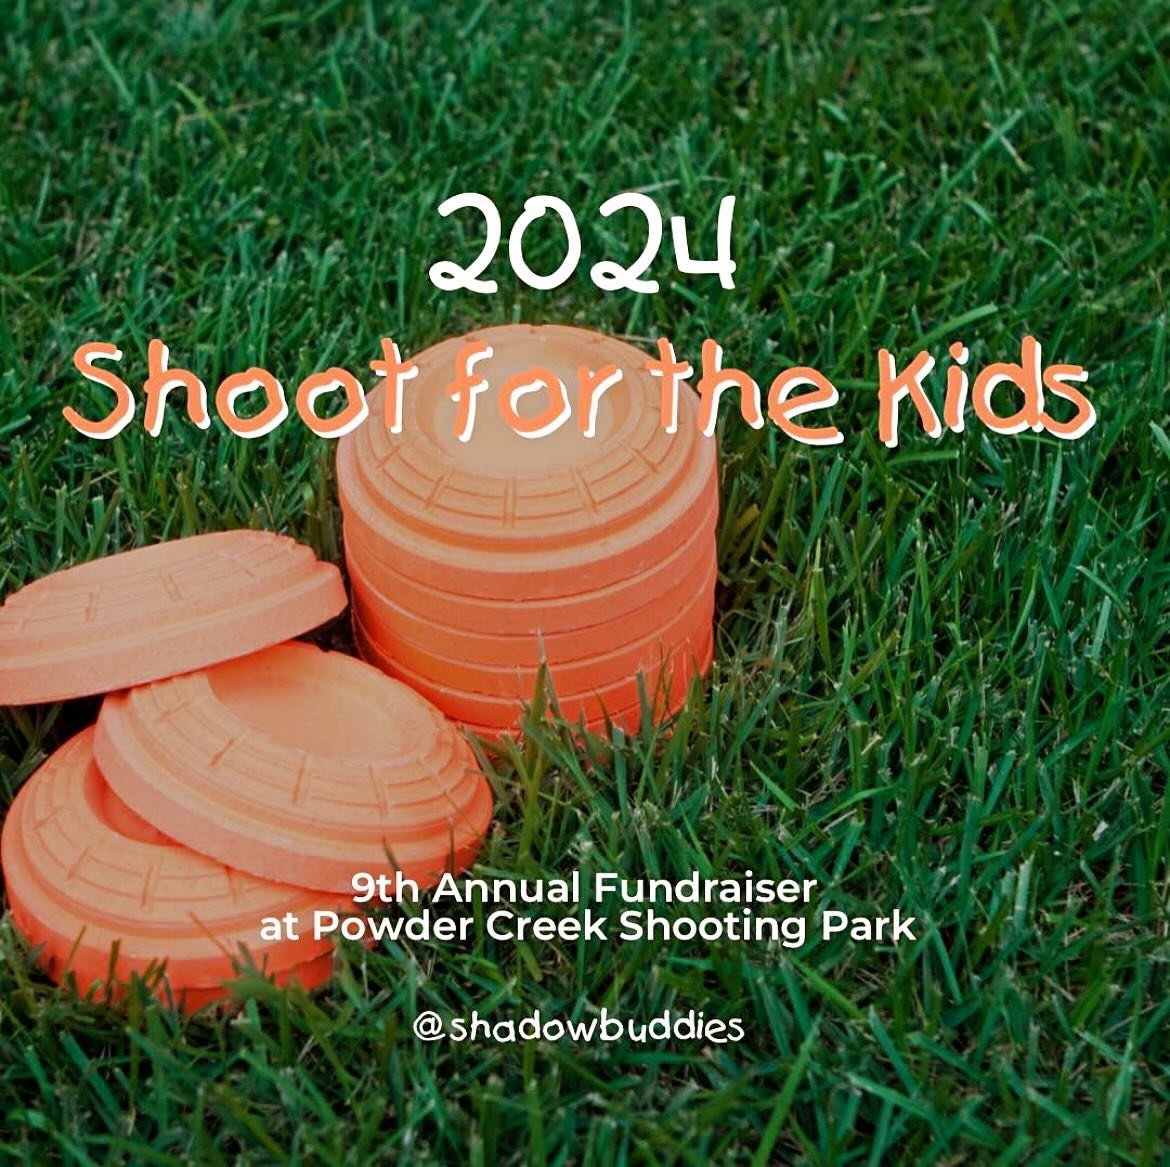 Two Days Away @shadowbuddies 
We are so excited to be a Premier Sponsor for the upcoming &ldquo;Shoot for the Kids&rdquo; Clay Shoot!

&ldquo;Shoot for the Kids&rdquo; is a clay target event, where teams from around KC come together to raise money fo